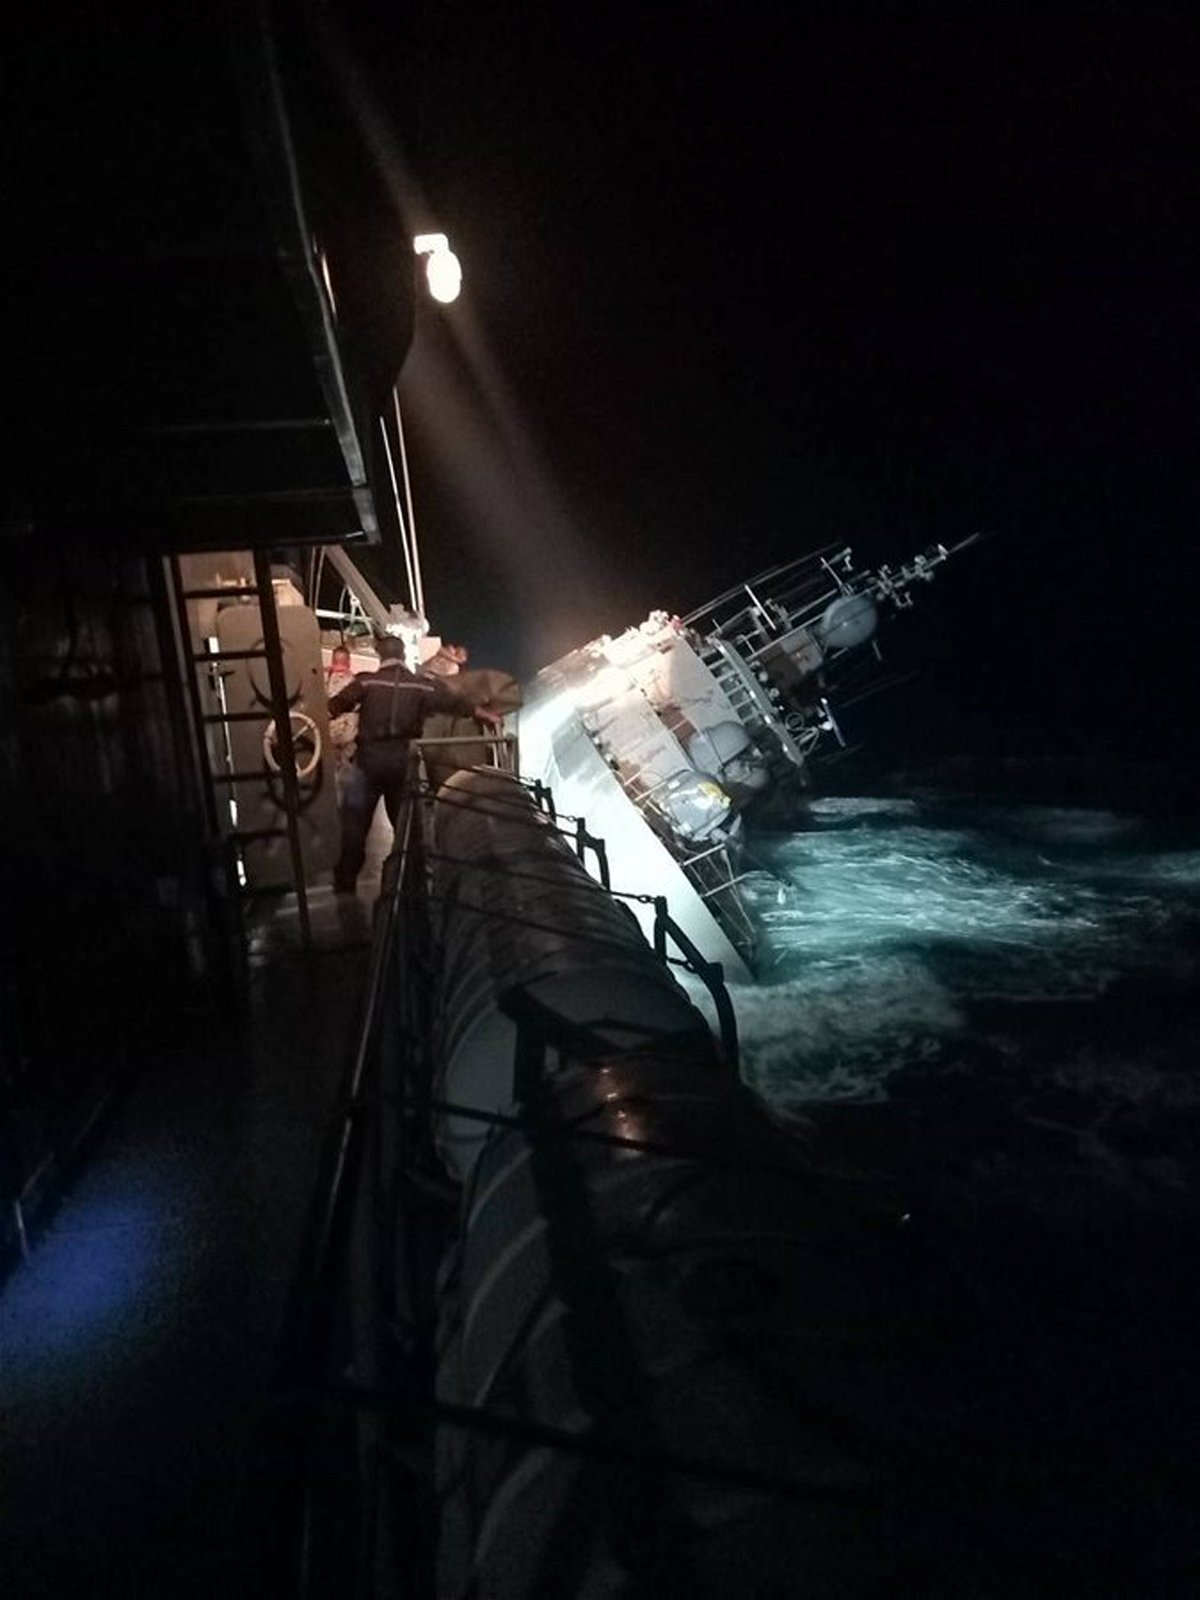 <i>Royal Thai Navy</i><br/>Thai naval officials said there were not enough life jackets for everyone aboard a warship that sank early Monday in severe weather in the Gulf of Thailand with the loss of at least six lives.